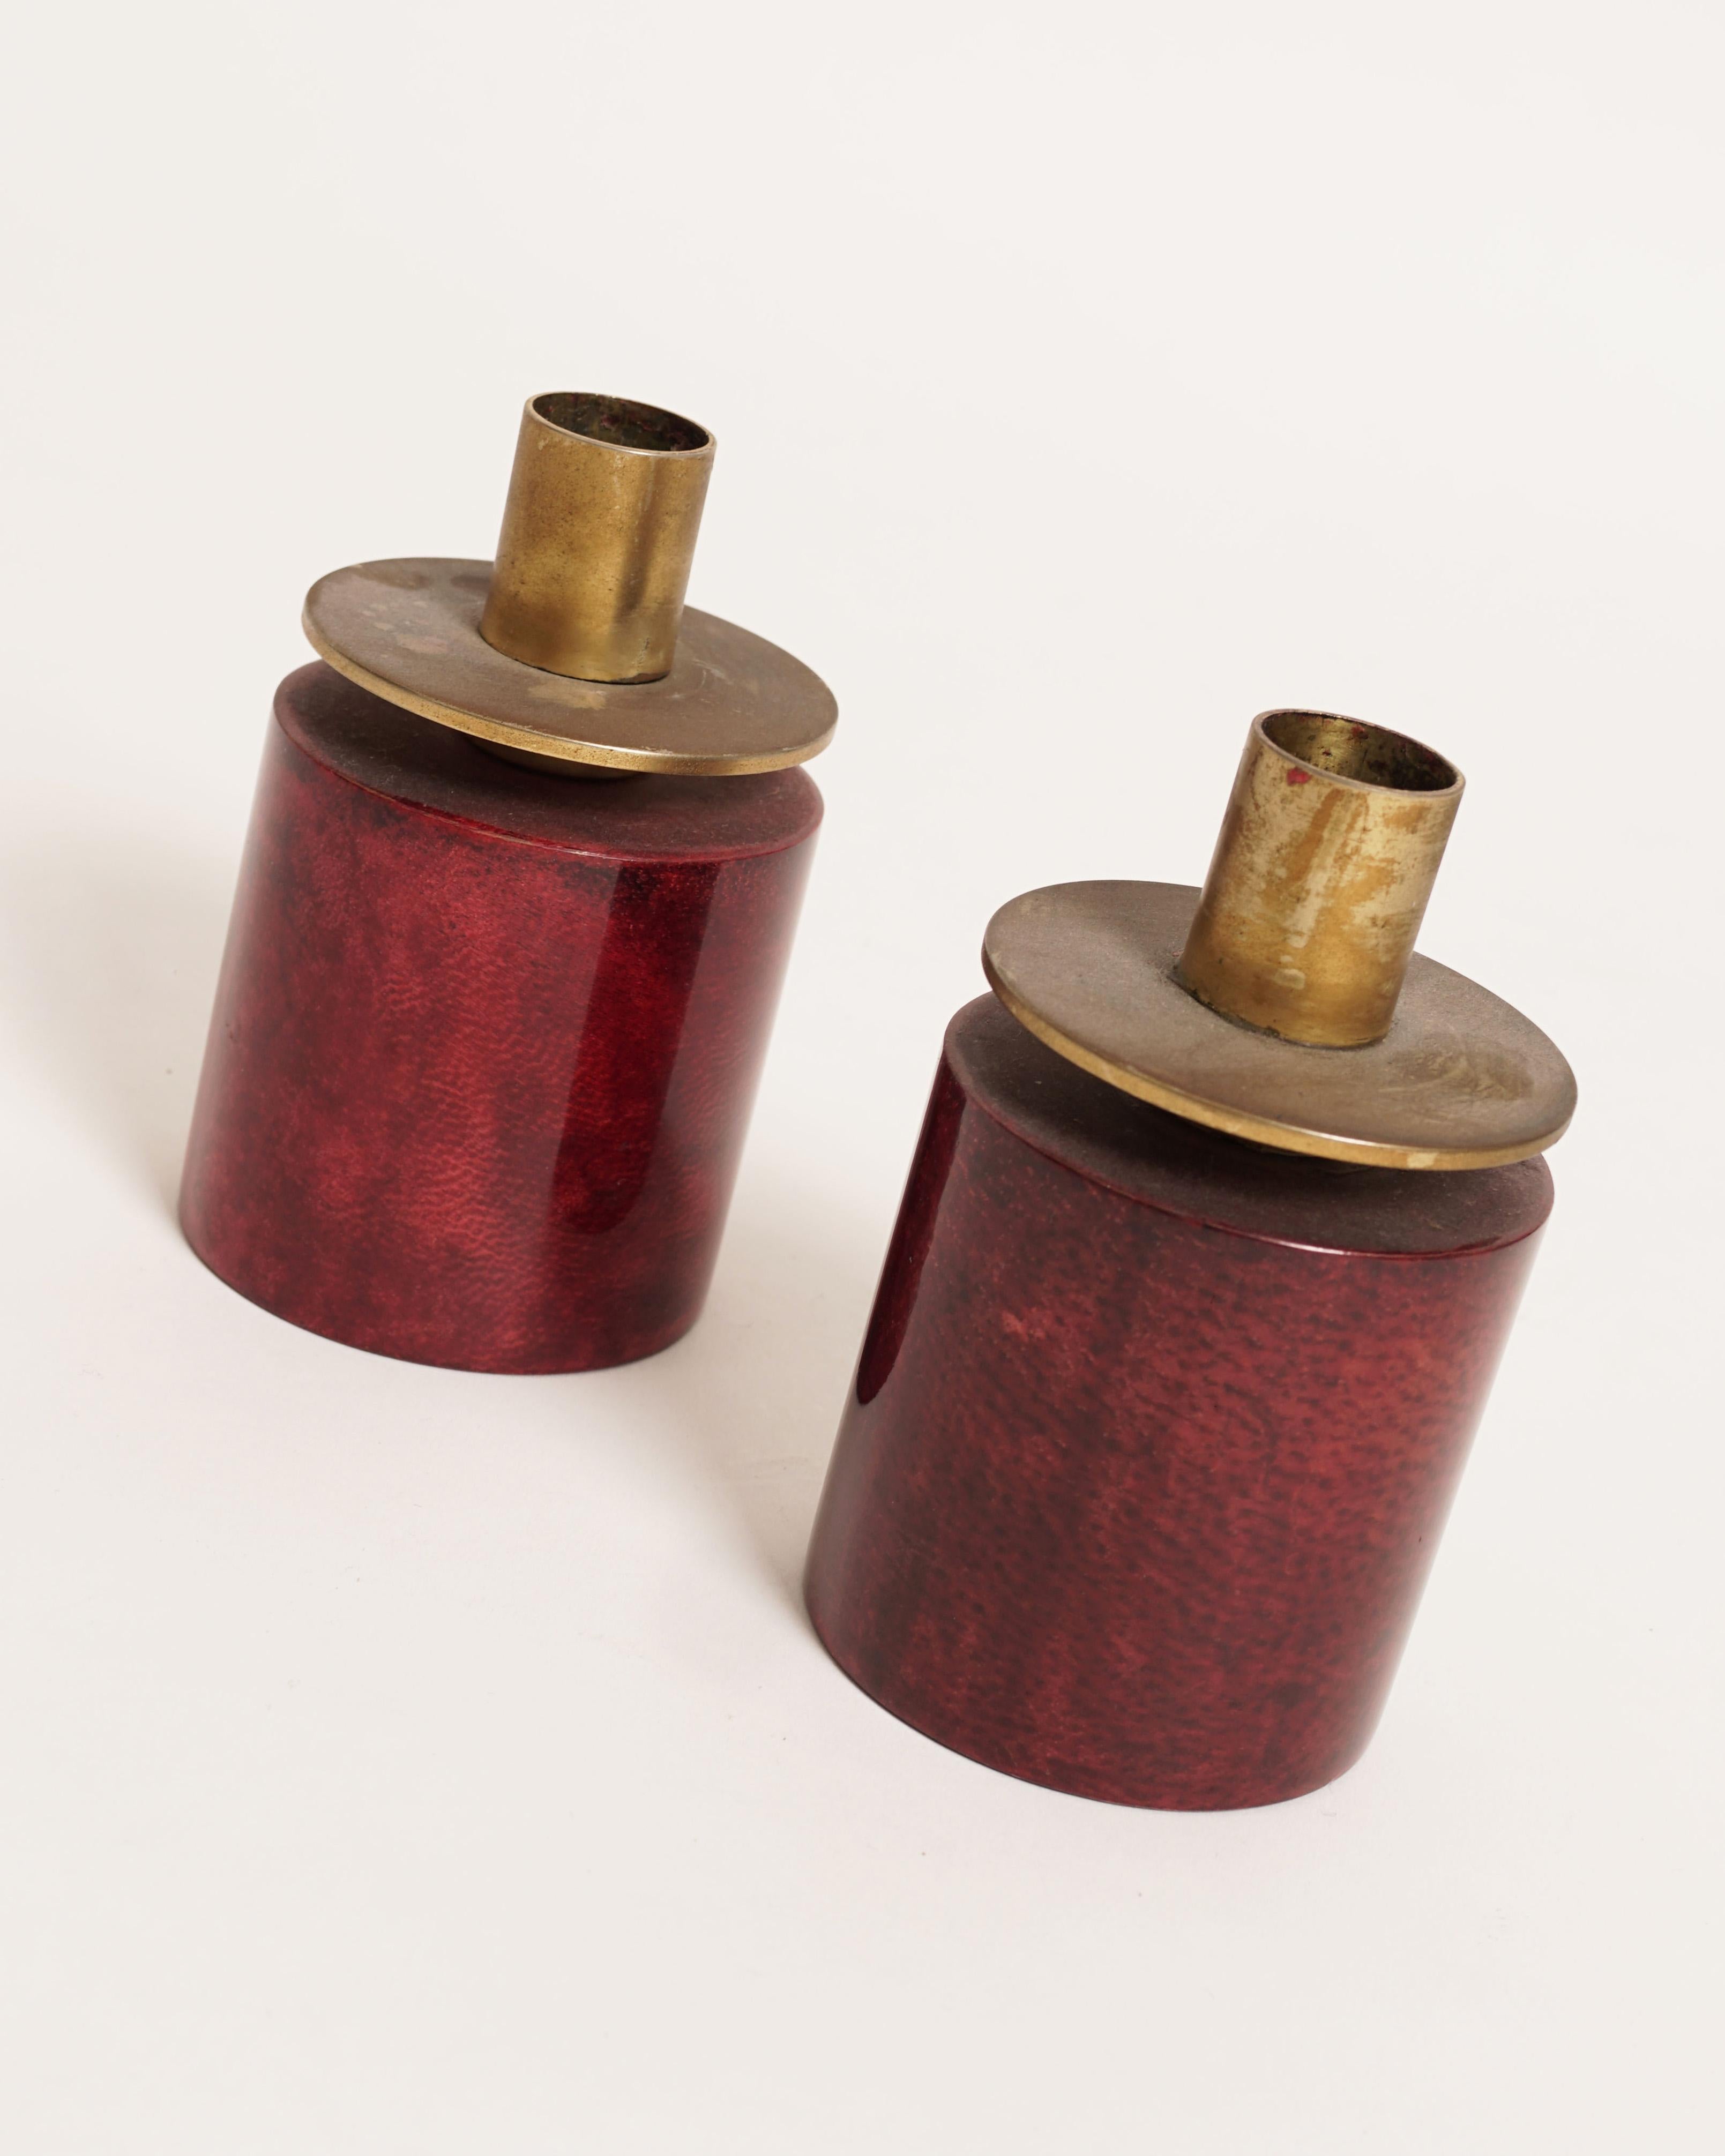 Aldo Tura
'Bougeoirs', A pair of candlesticks, c. 1960
Execution: brass and carmine lacquered parchment
Signed: Tura
Measure: H : 11 cm (4.3